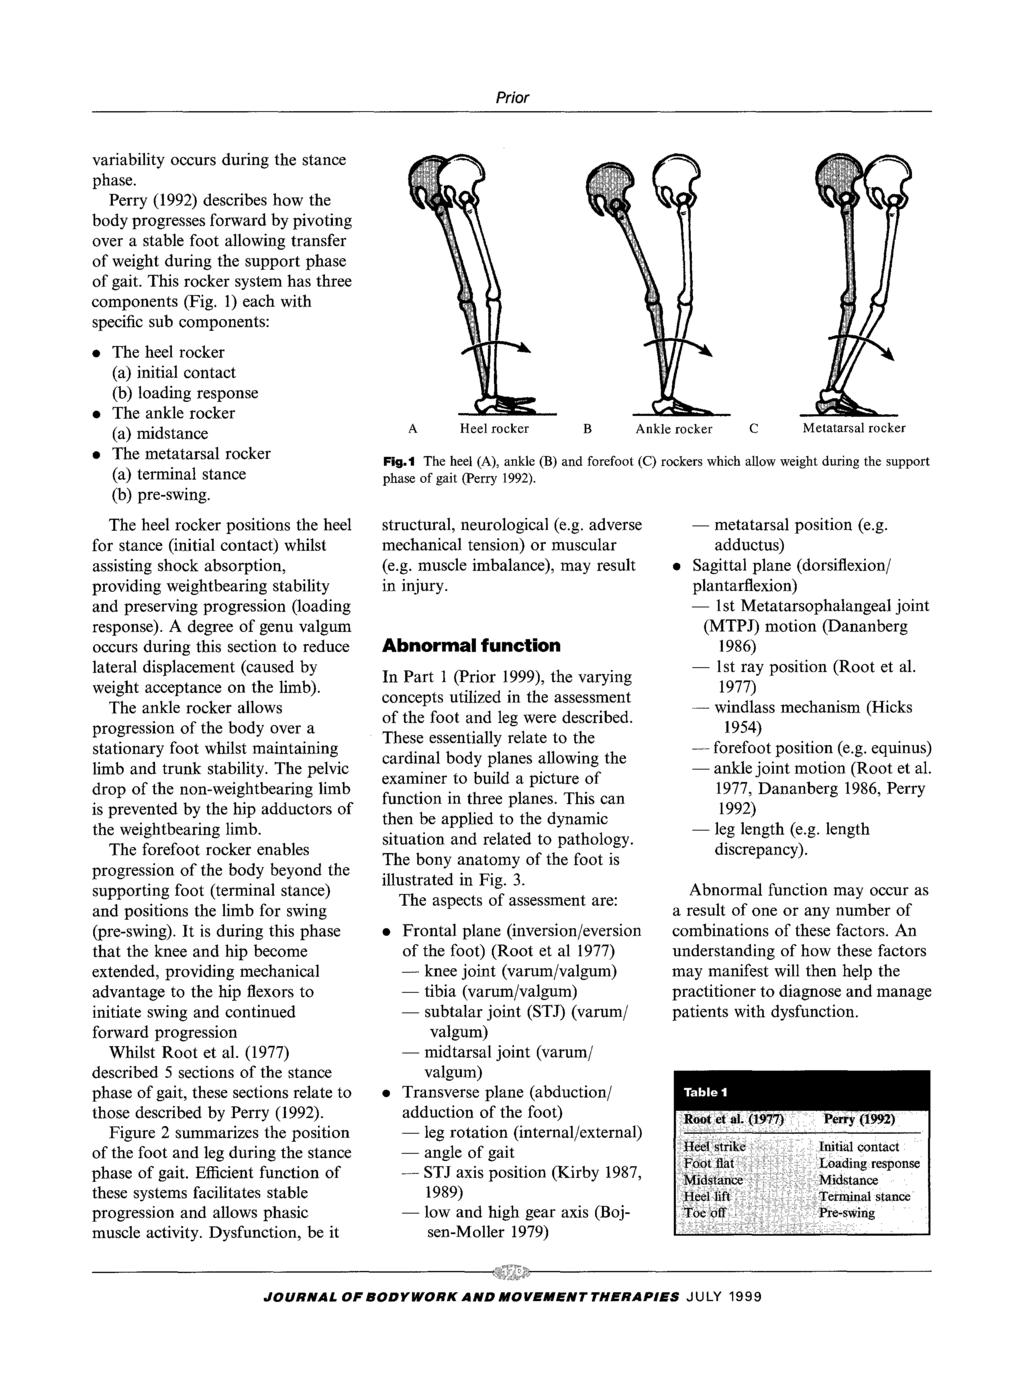 - - leg - - angle - - low - - metatarsal - - 1 - - windlass - - leg variability occurs during the stance phase.